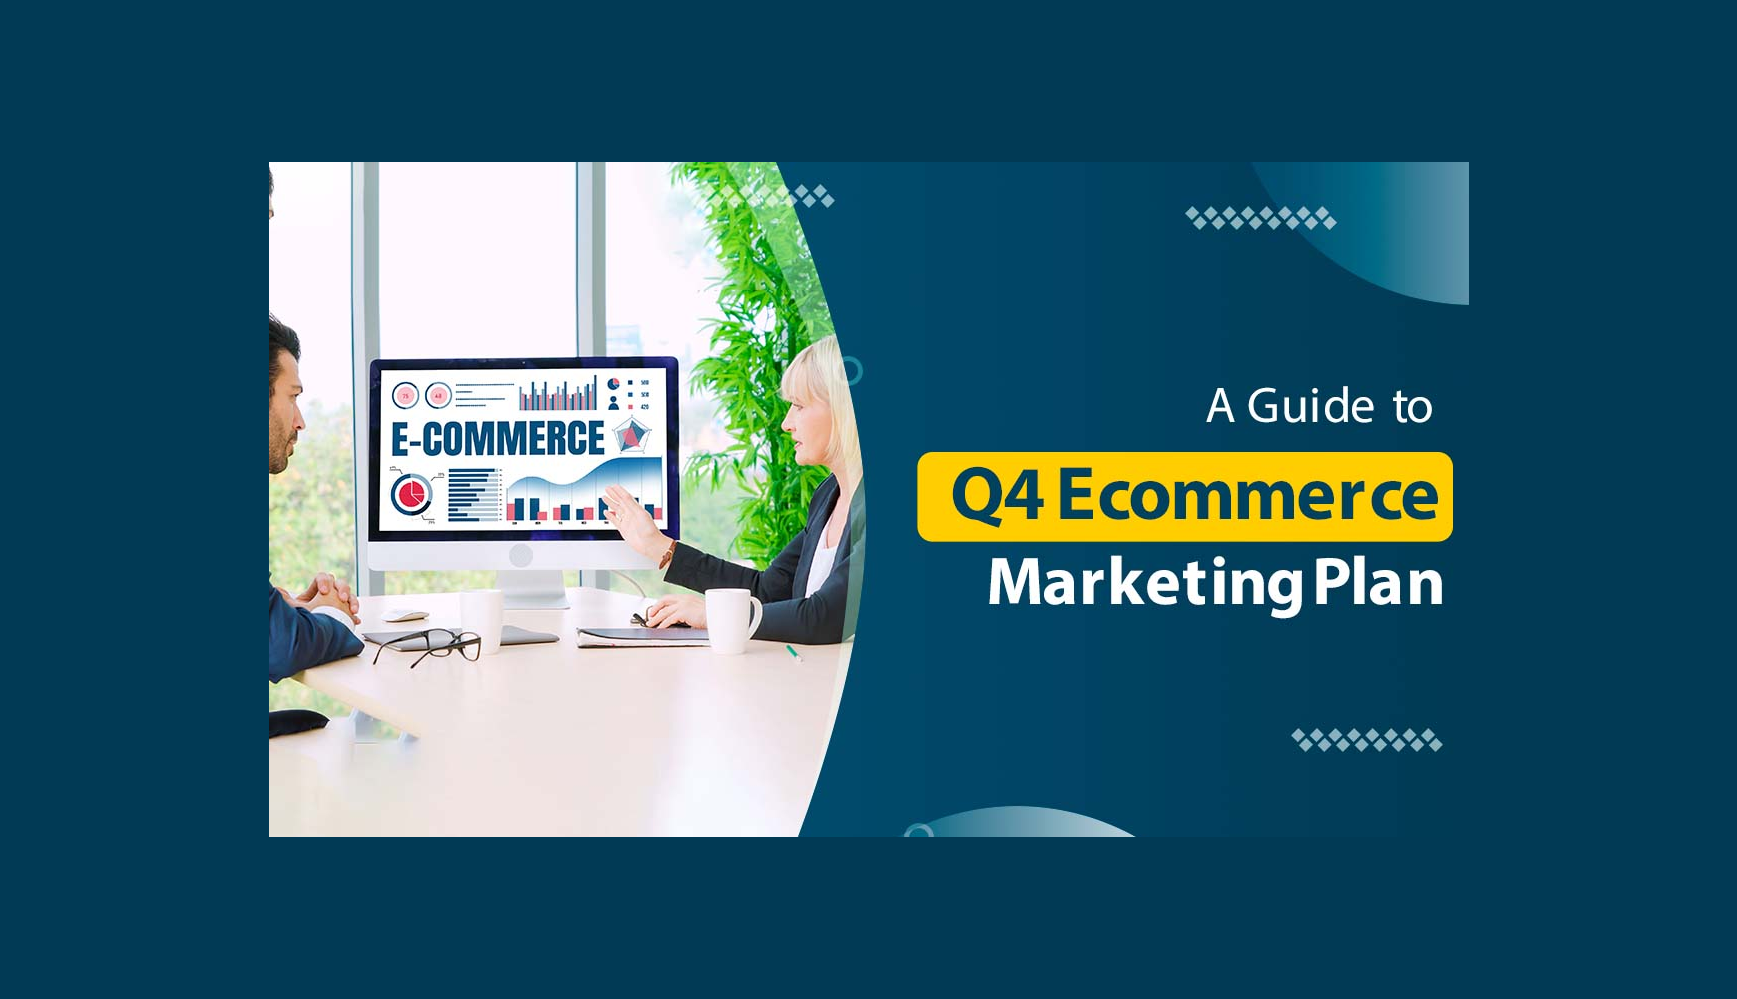 #A Guide to Q4 Ecommerce Marketing Plan